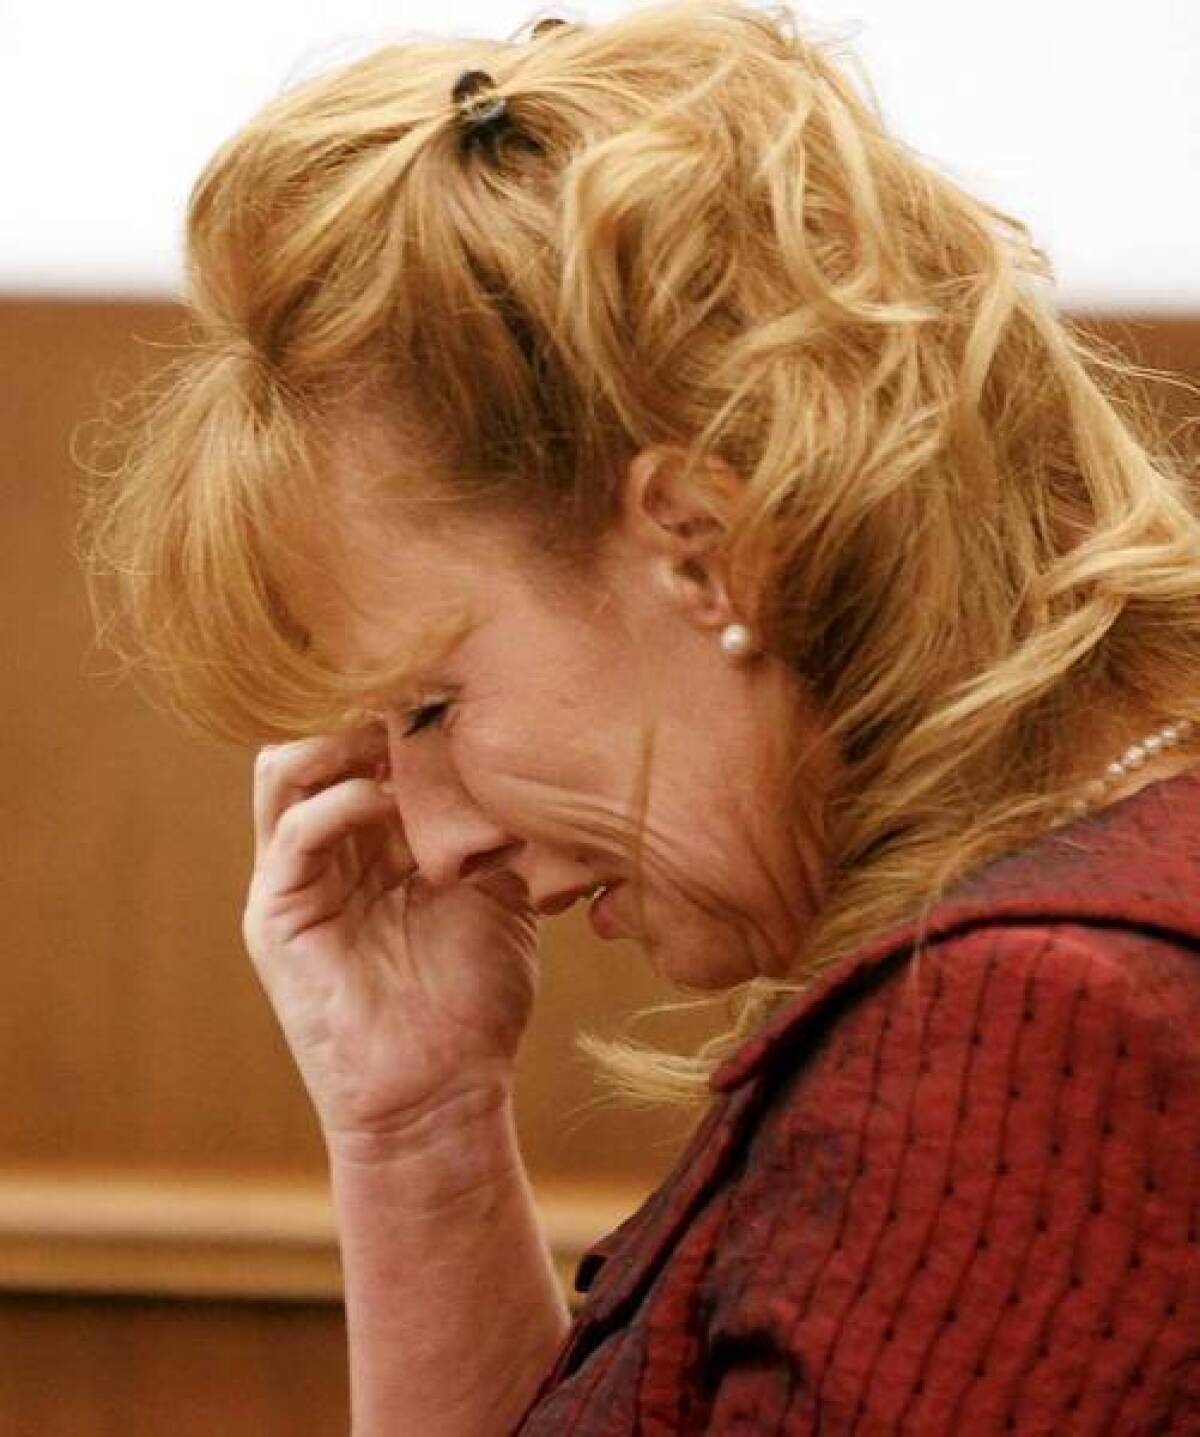 Brinda Sue McCoy cries in court after being found guilty in June of five felony counts of assault with a semi-automatic firearm on a peace officer and one felony count of discharging a firearm with gross negligence with sentencing enhancements.